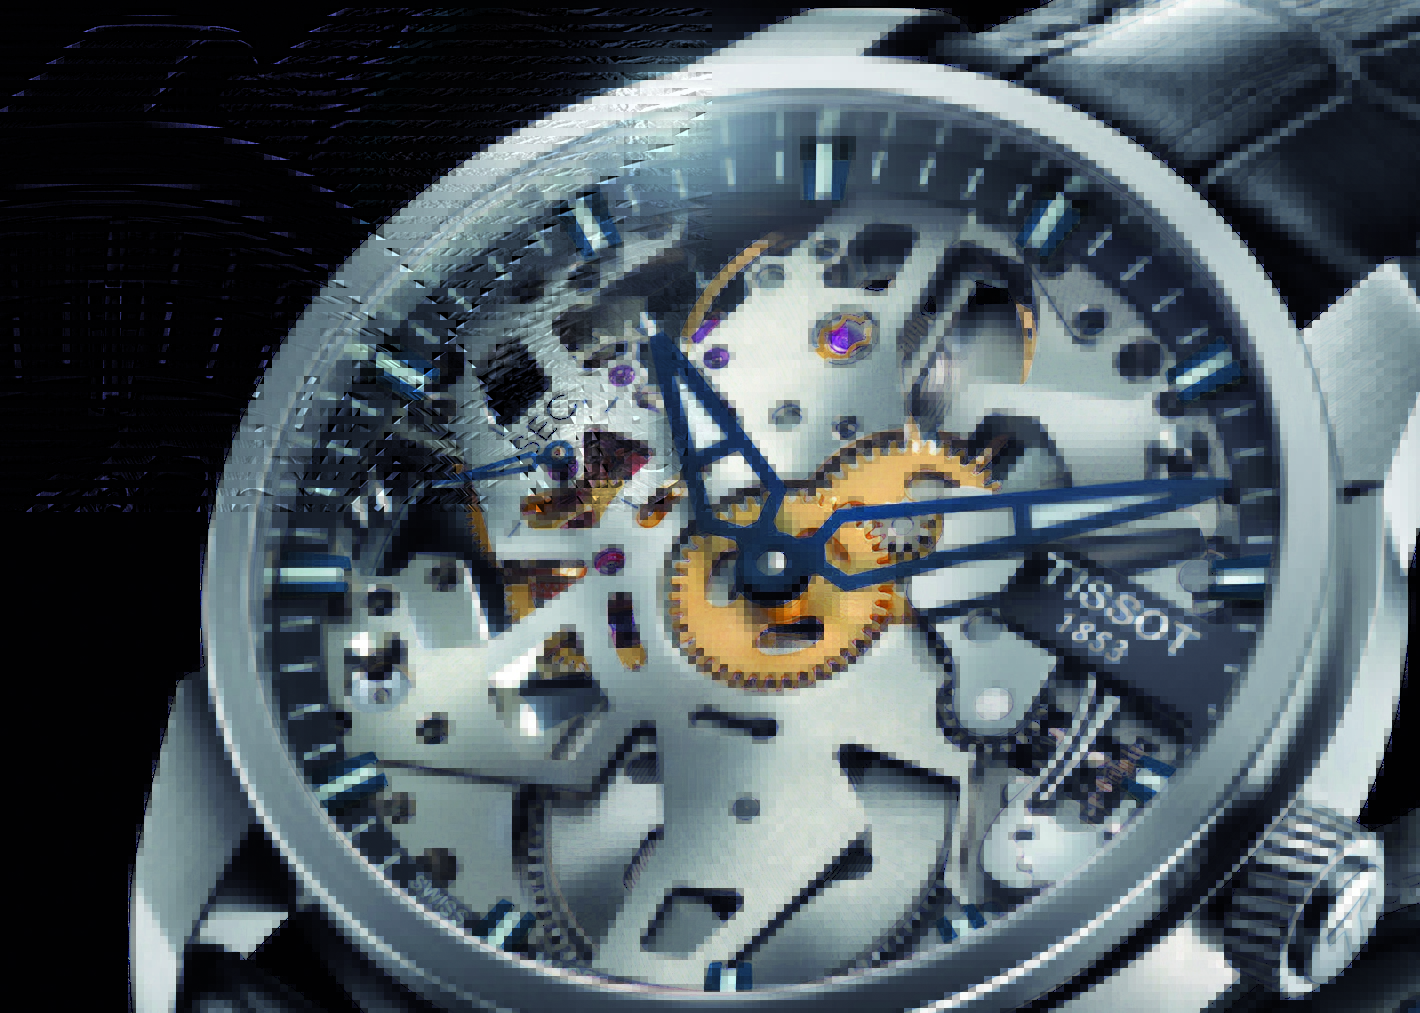 anteprima-baselword-2013-tissot-t-complication-squelette_0-100_4